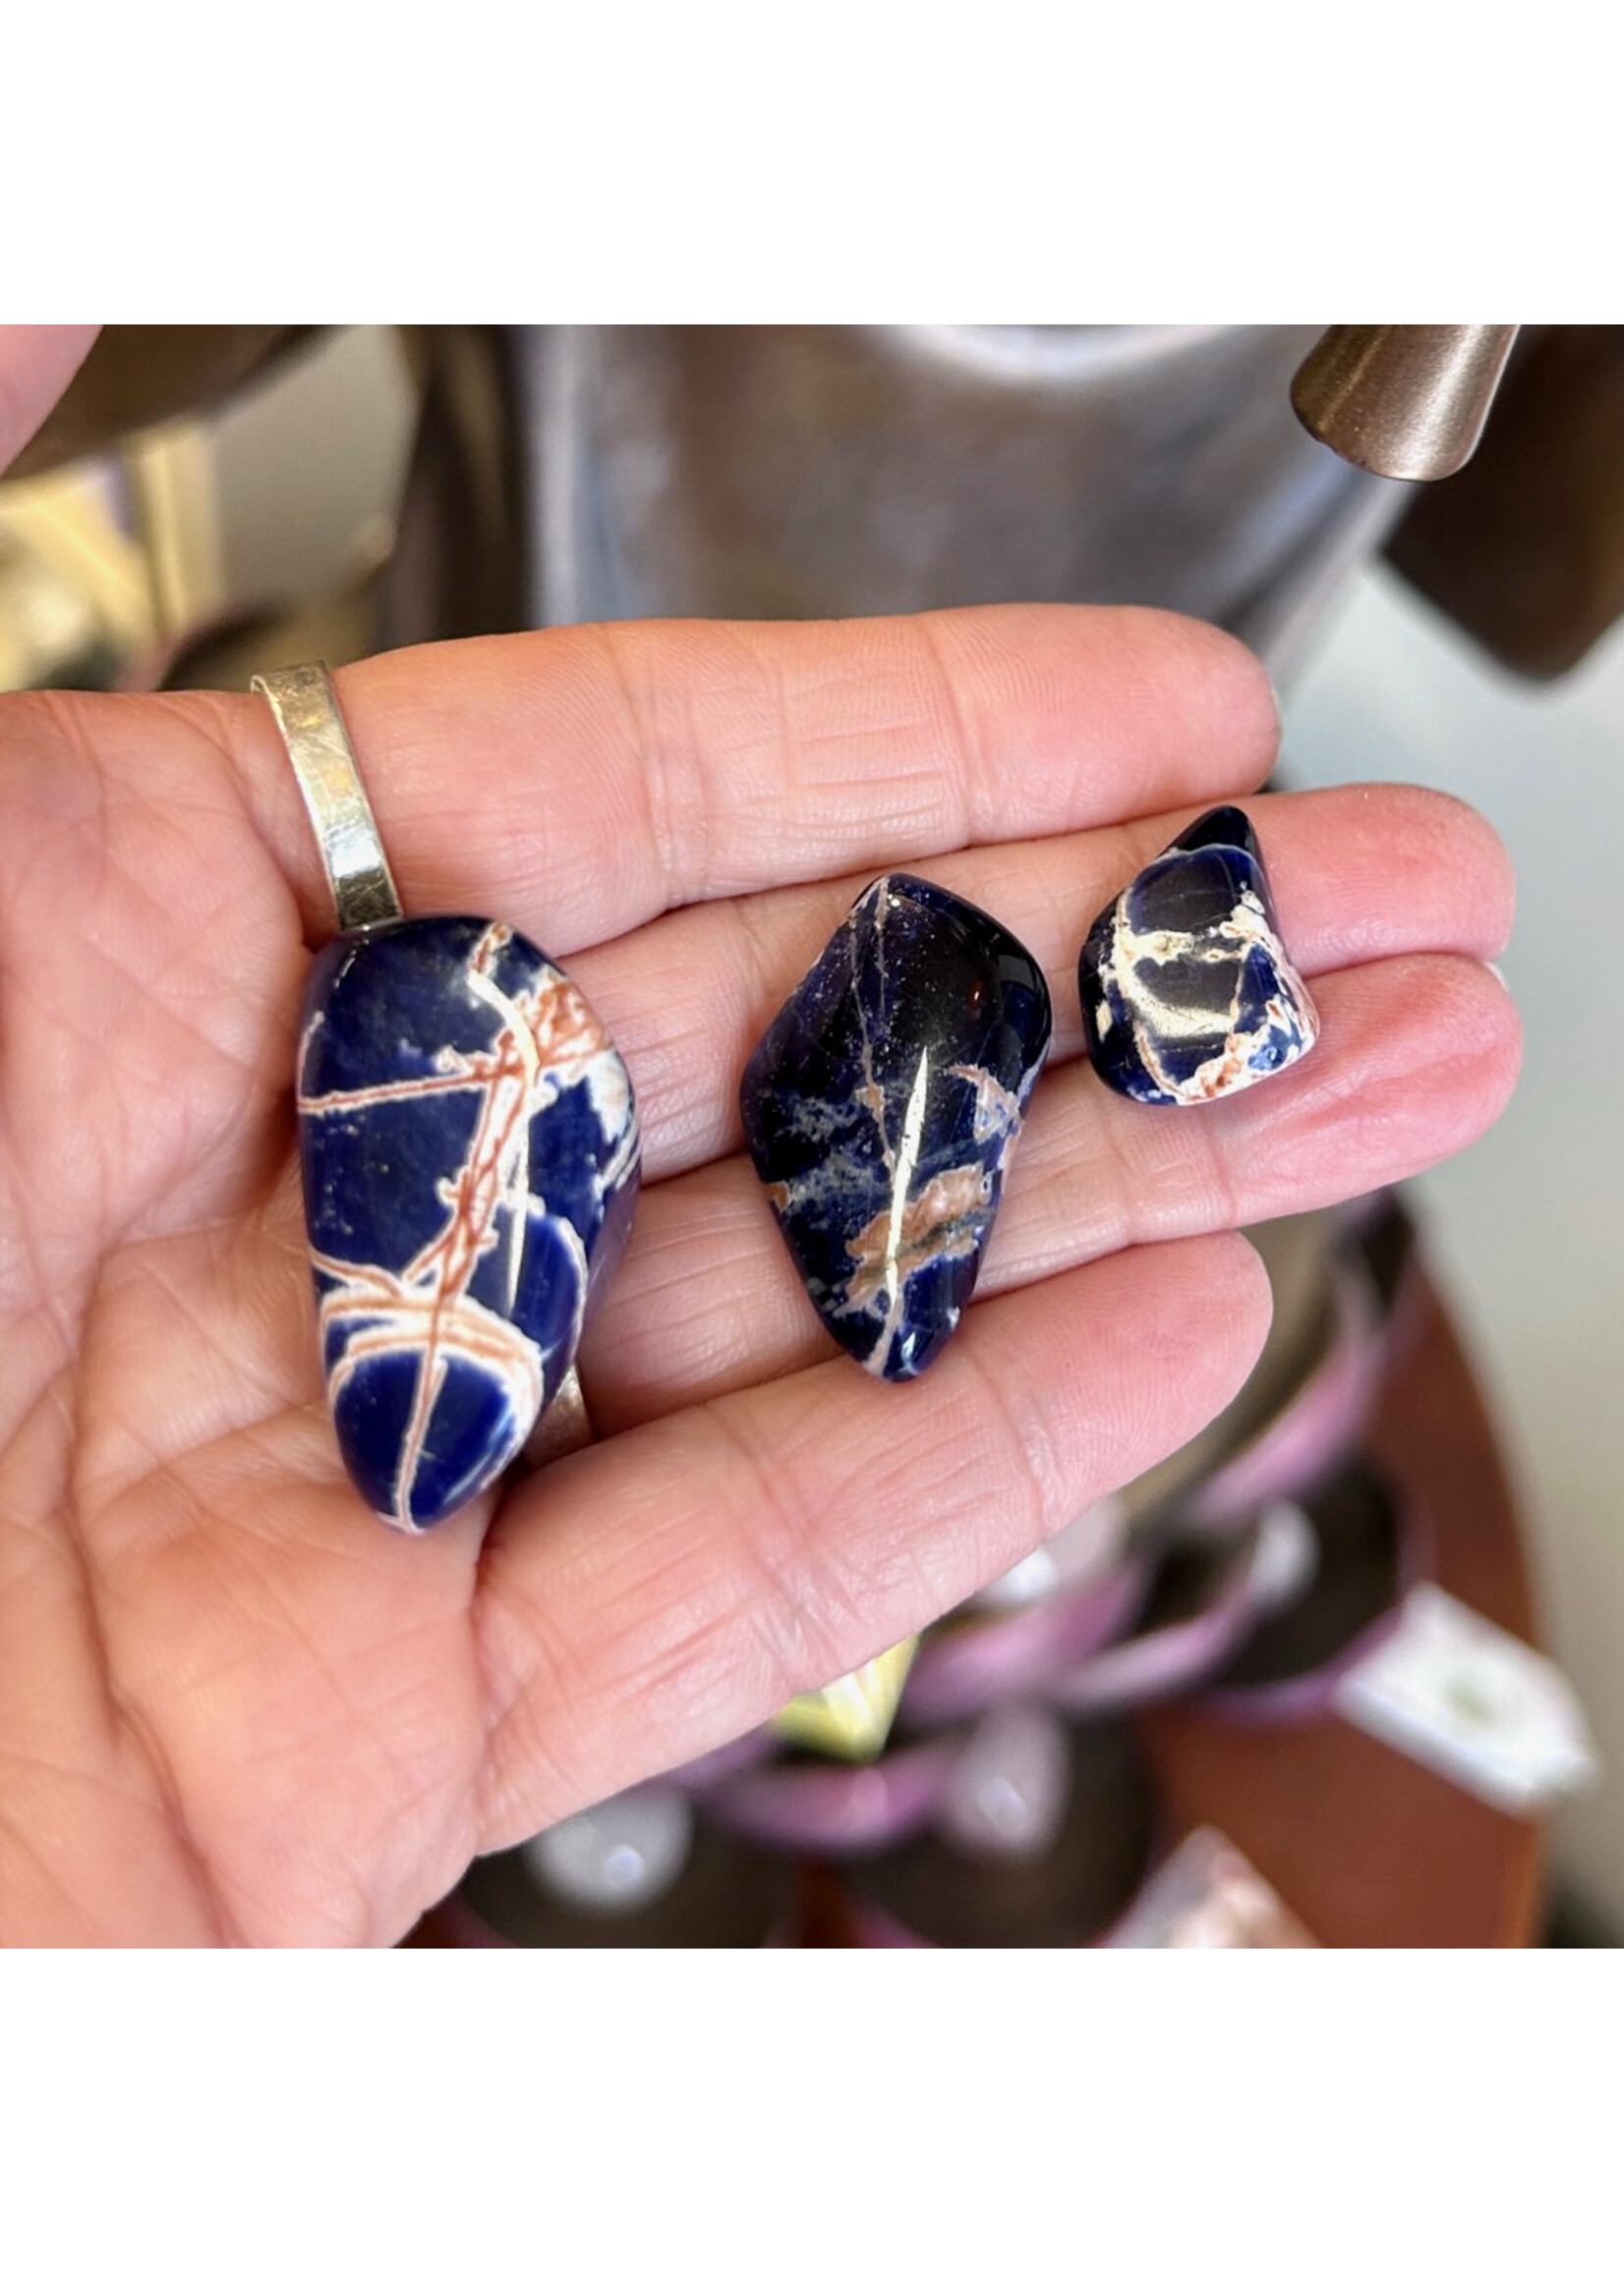 Sodalite Sunstone Tumbled for intuitive flow